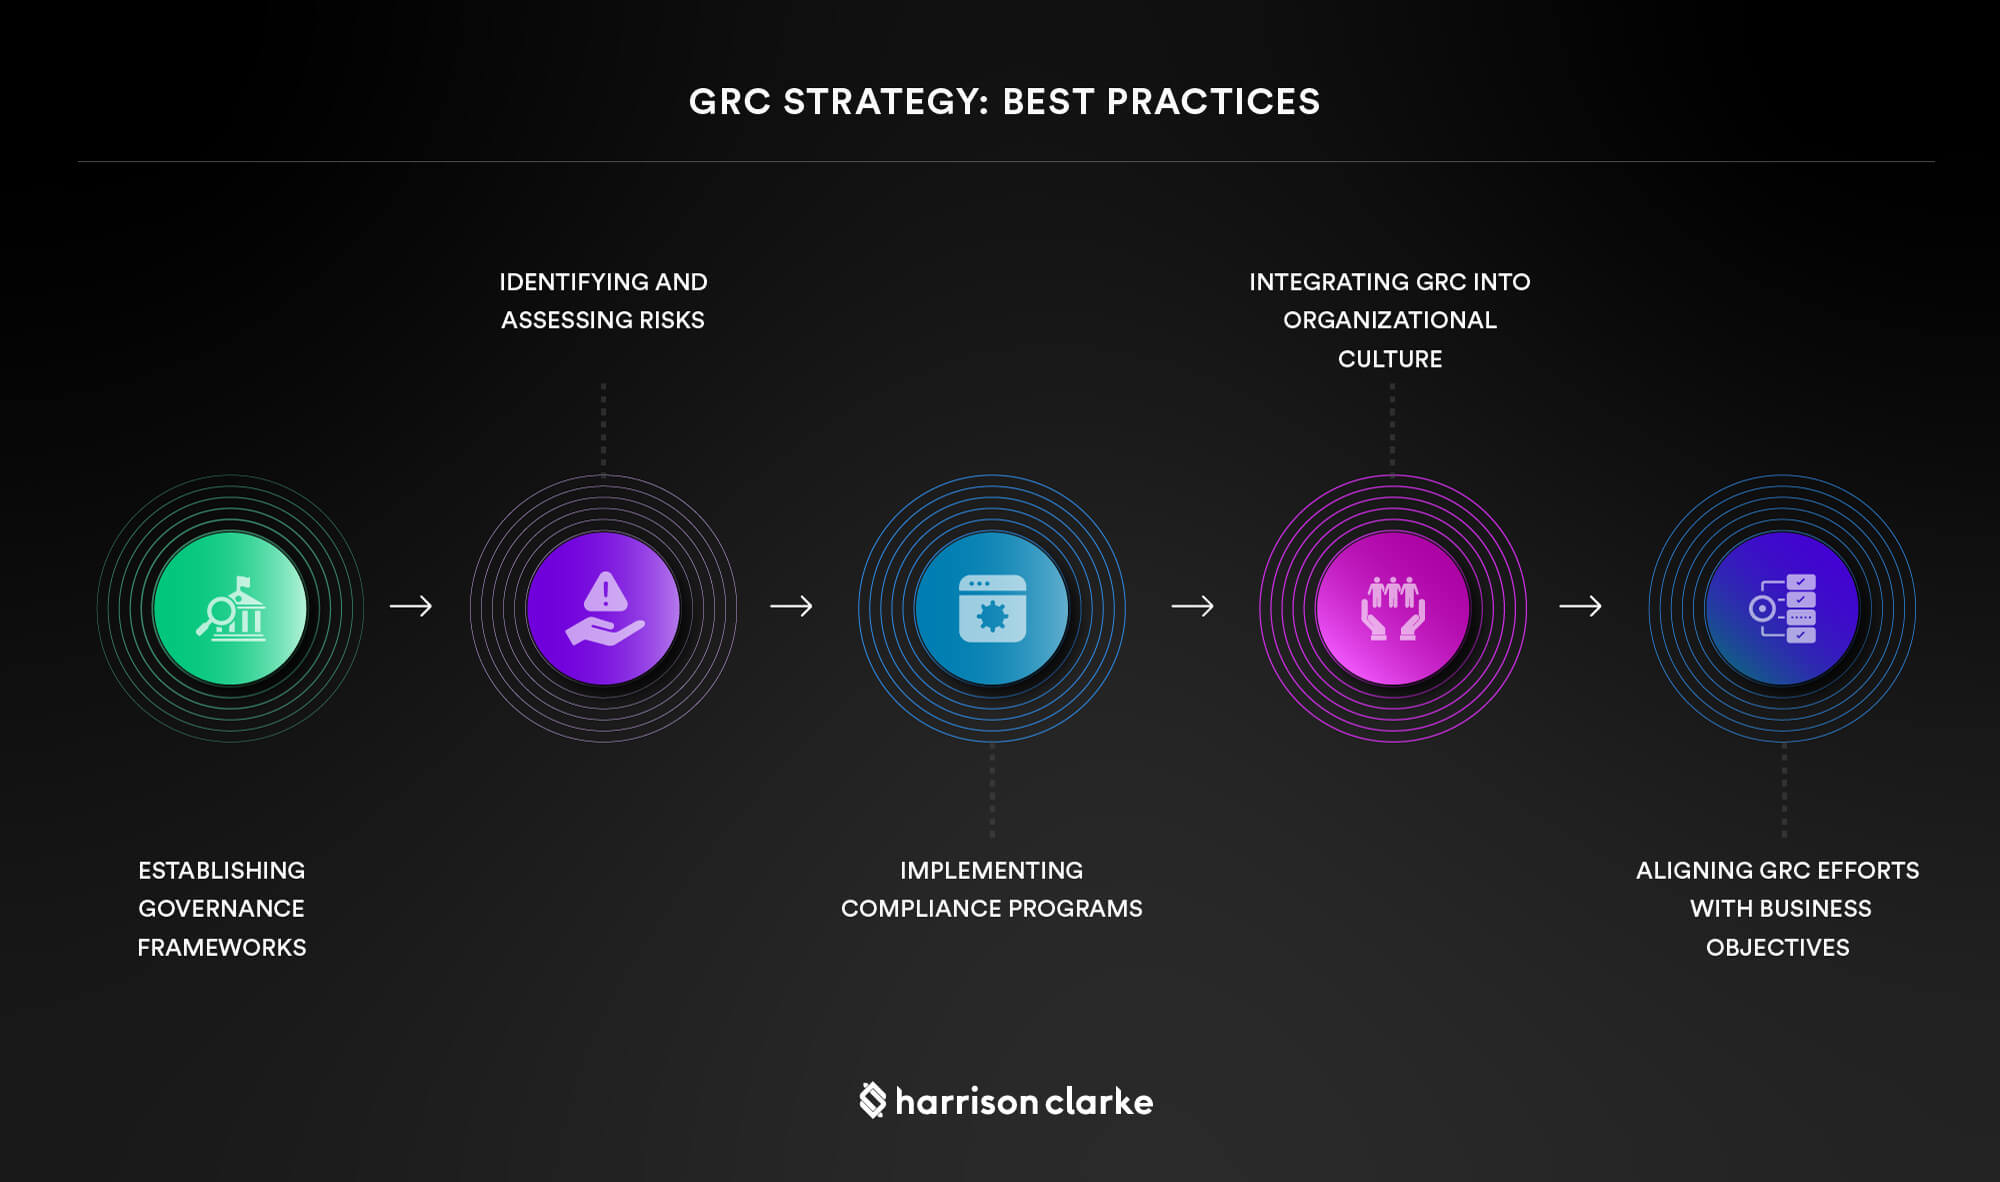 GRC Strategy - Best Practices